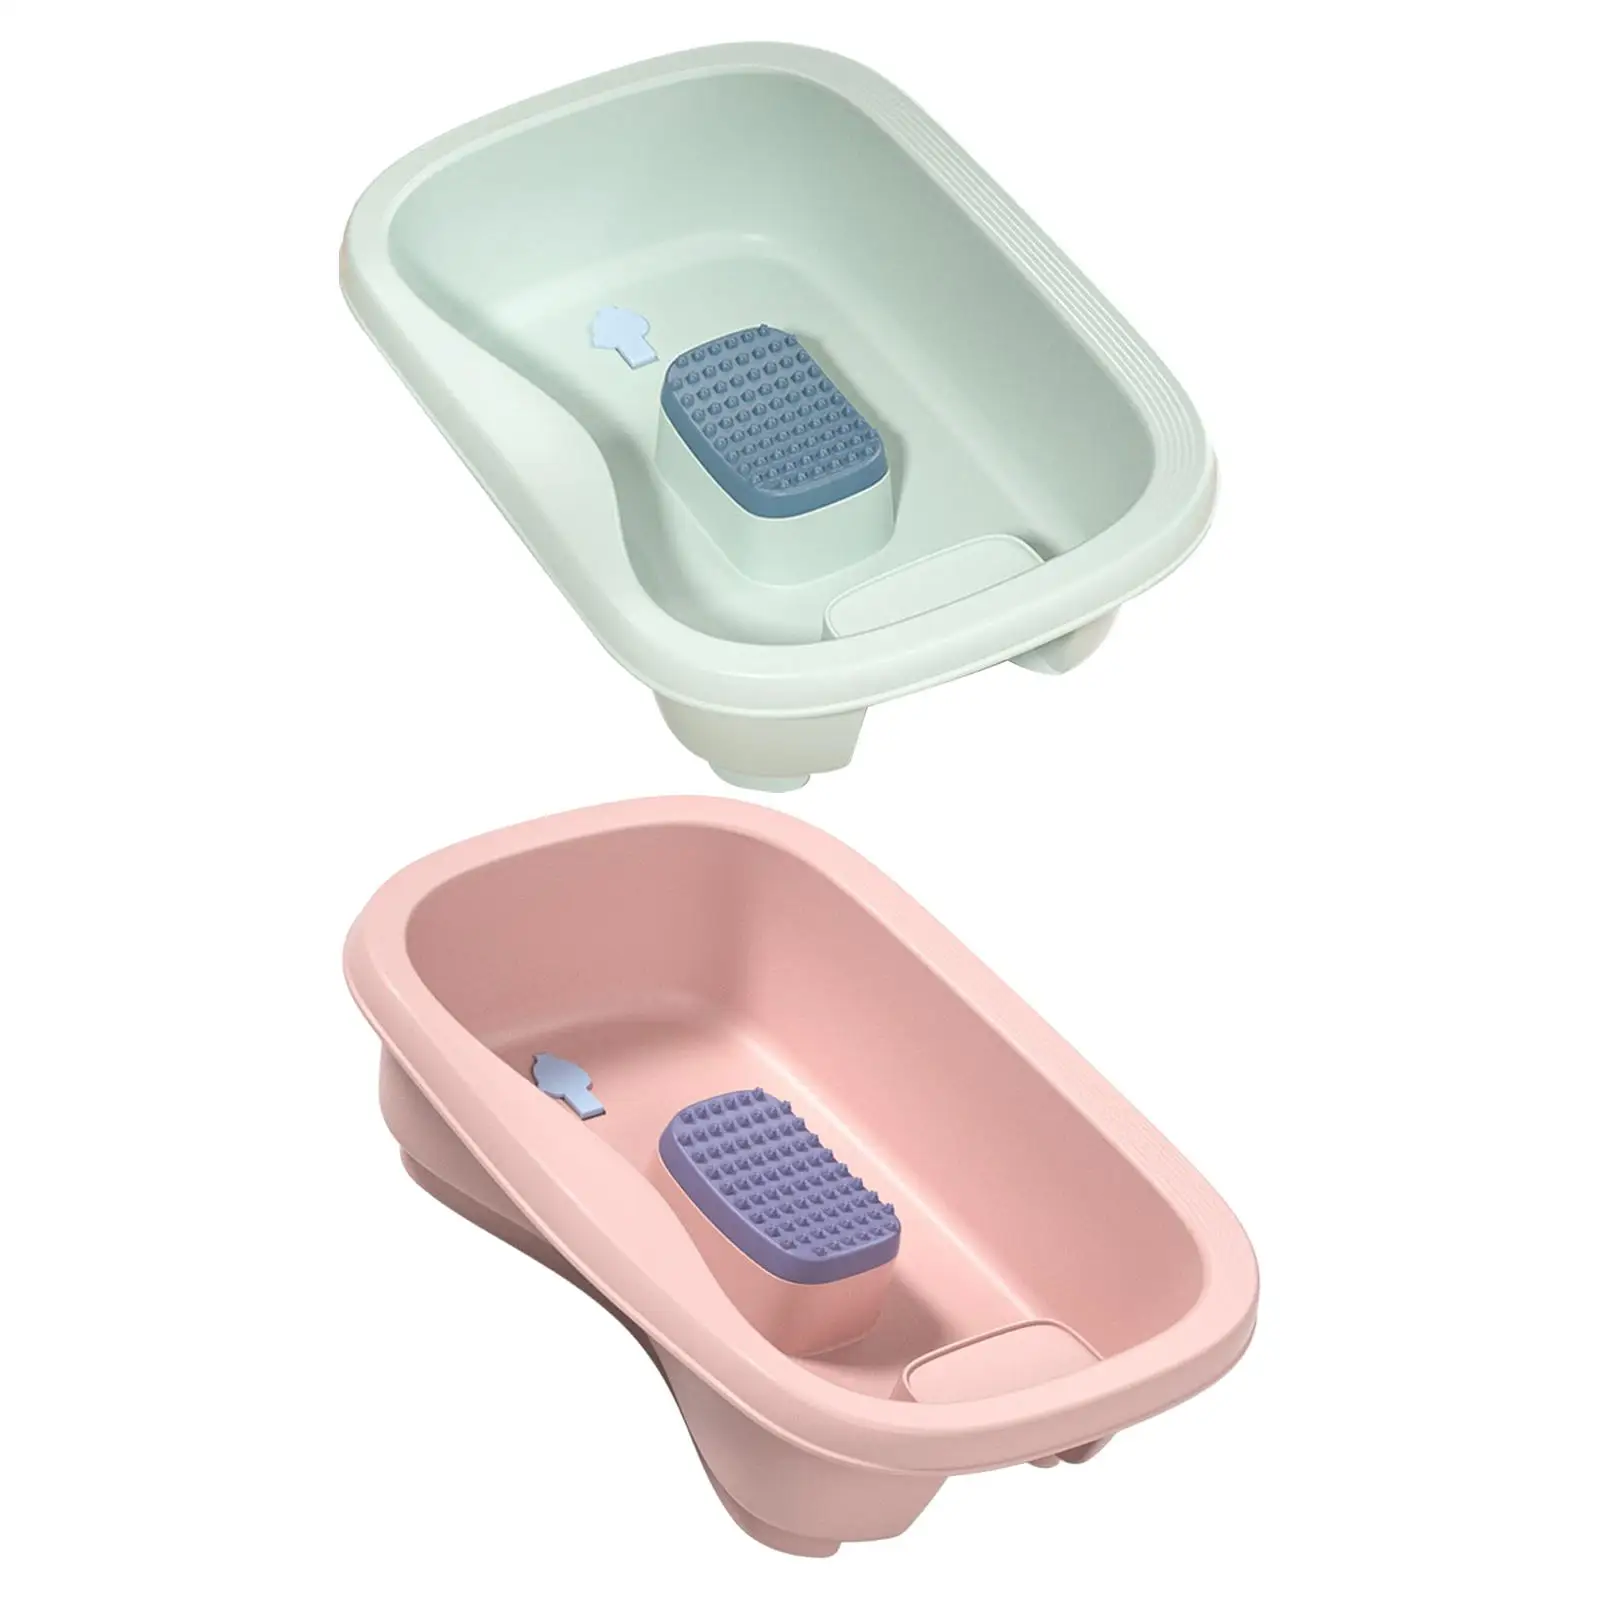 Portable Bed Shampoo Basin Comfortable  Tray Bowl Hair Washing Sink Mobile Shower for Hair Washing SPA Disabled Pregnant